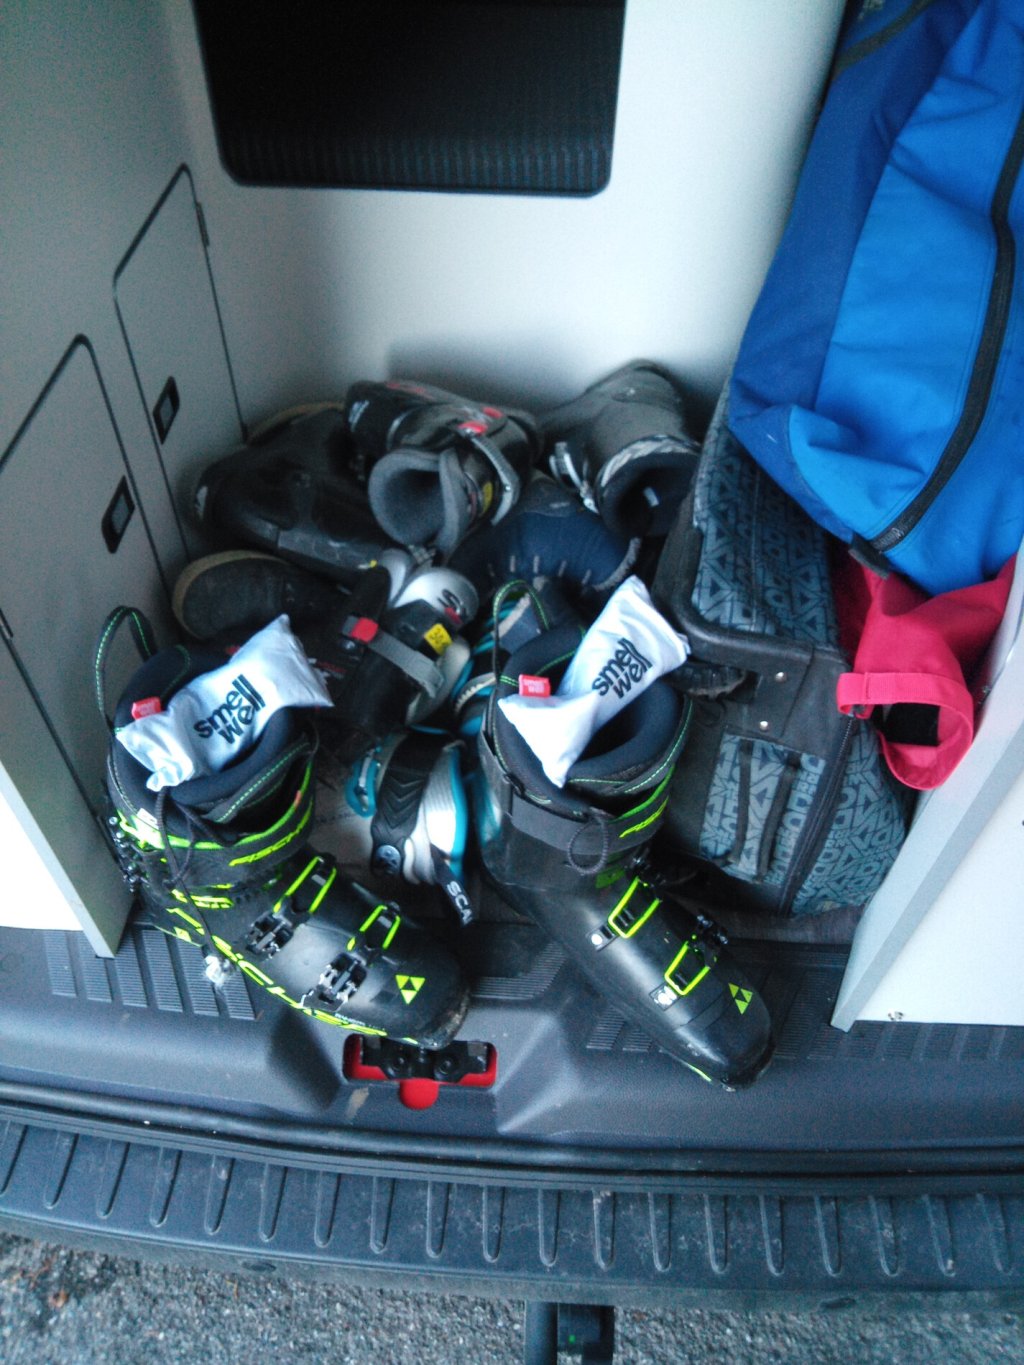 For practical reasons, the shoes stay in the back of the car anyway